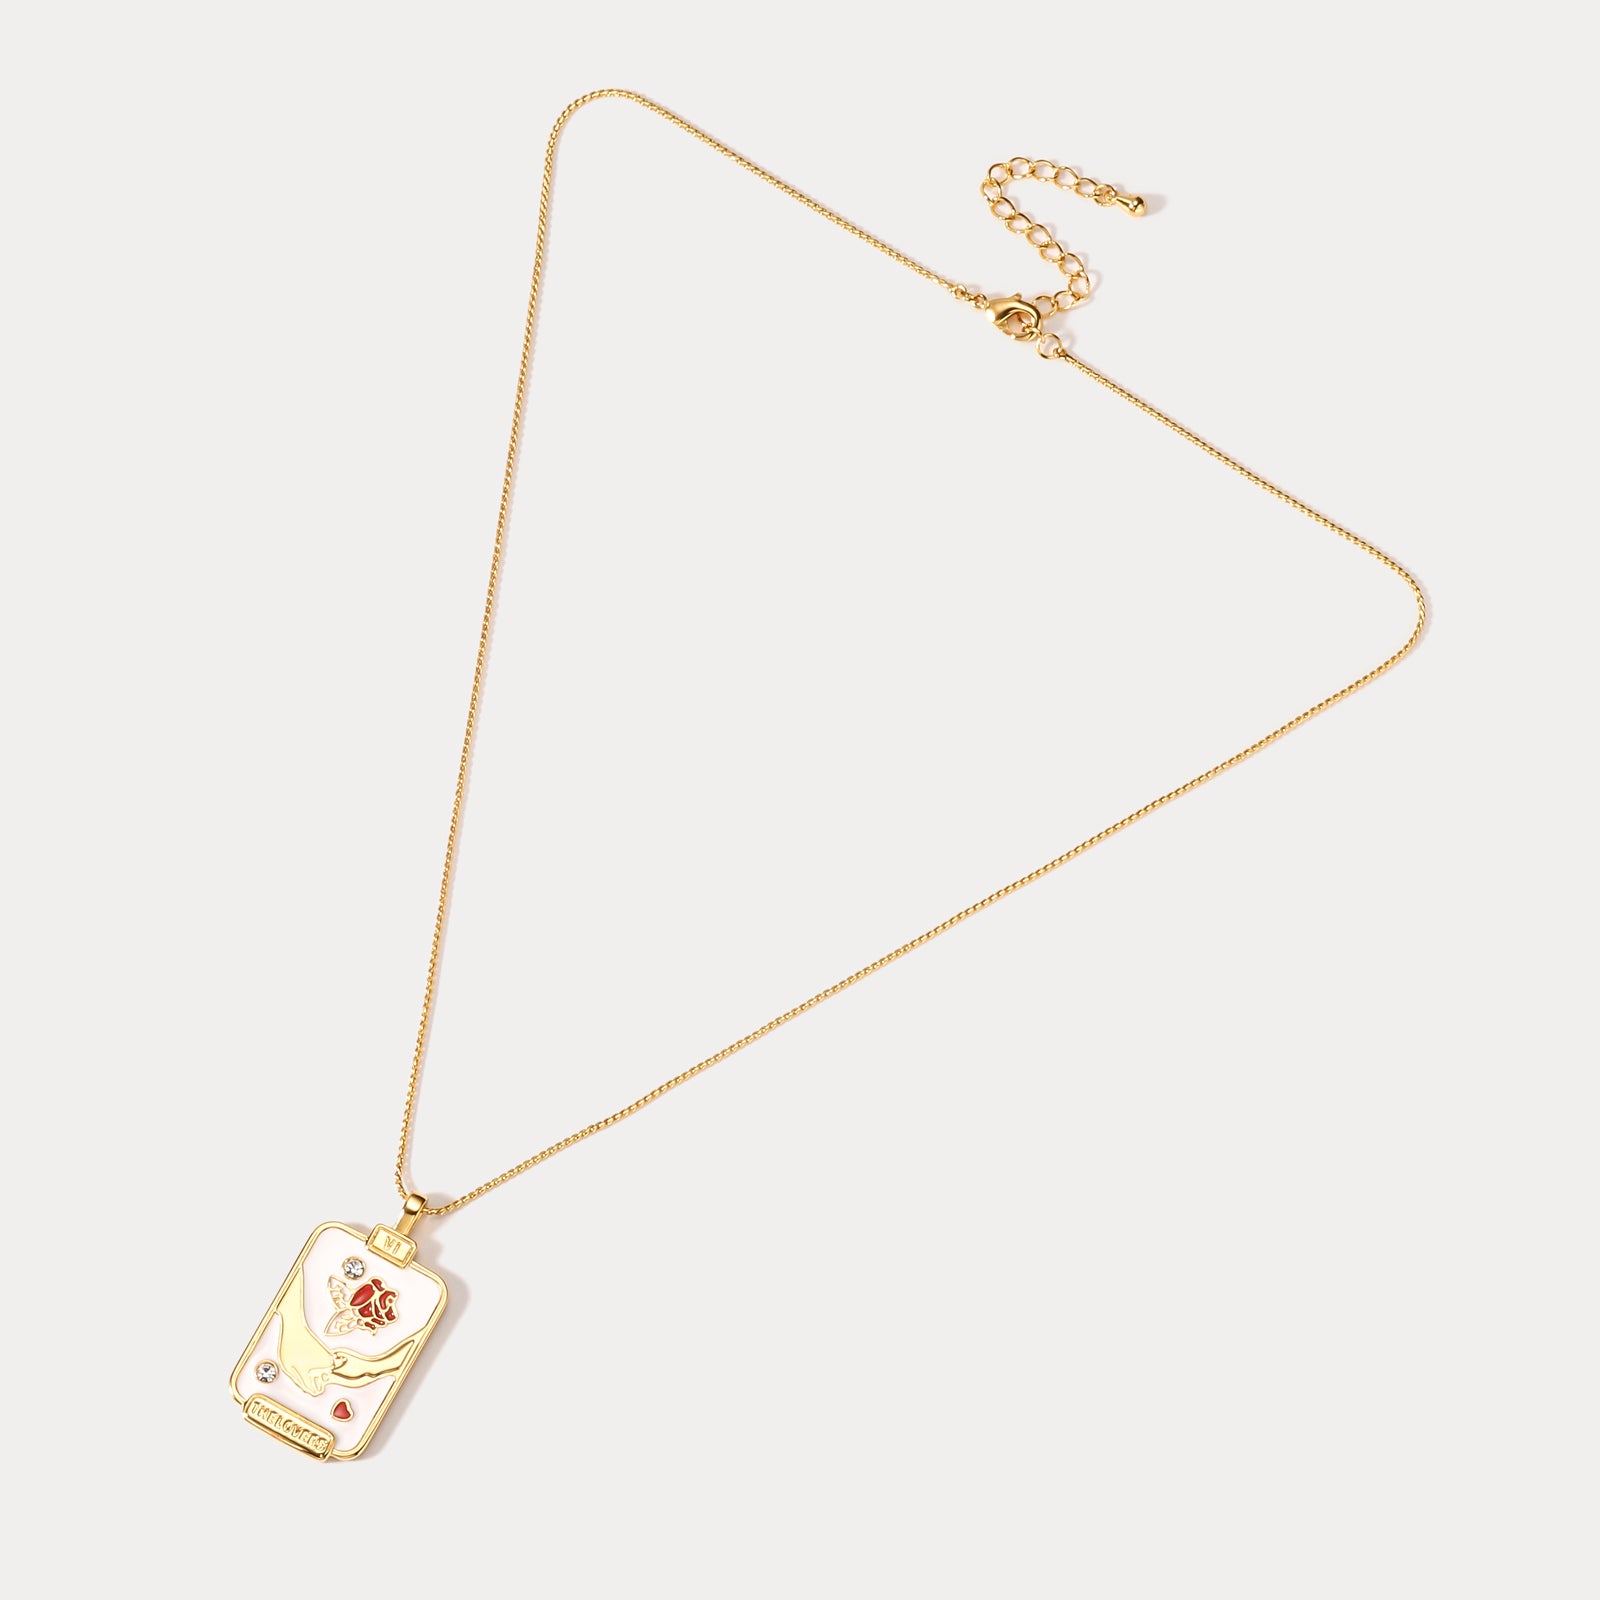 Lover Tarot Necklace Valentine's Day Gifts for Her